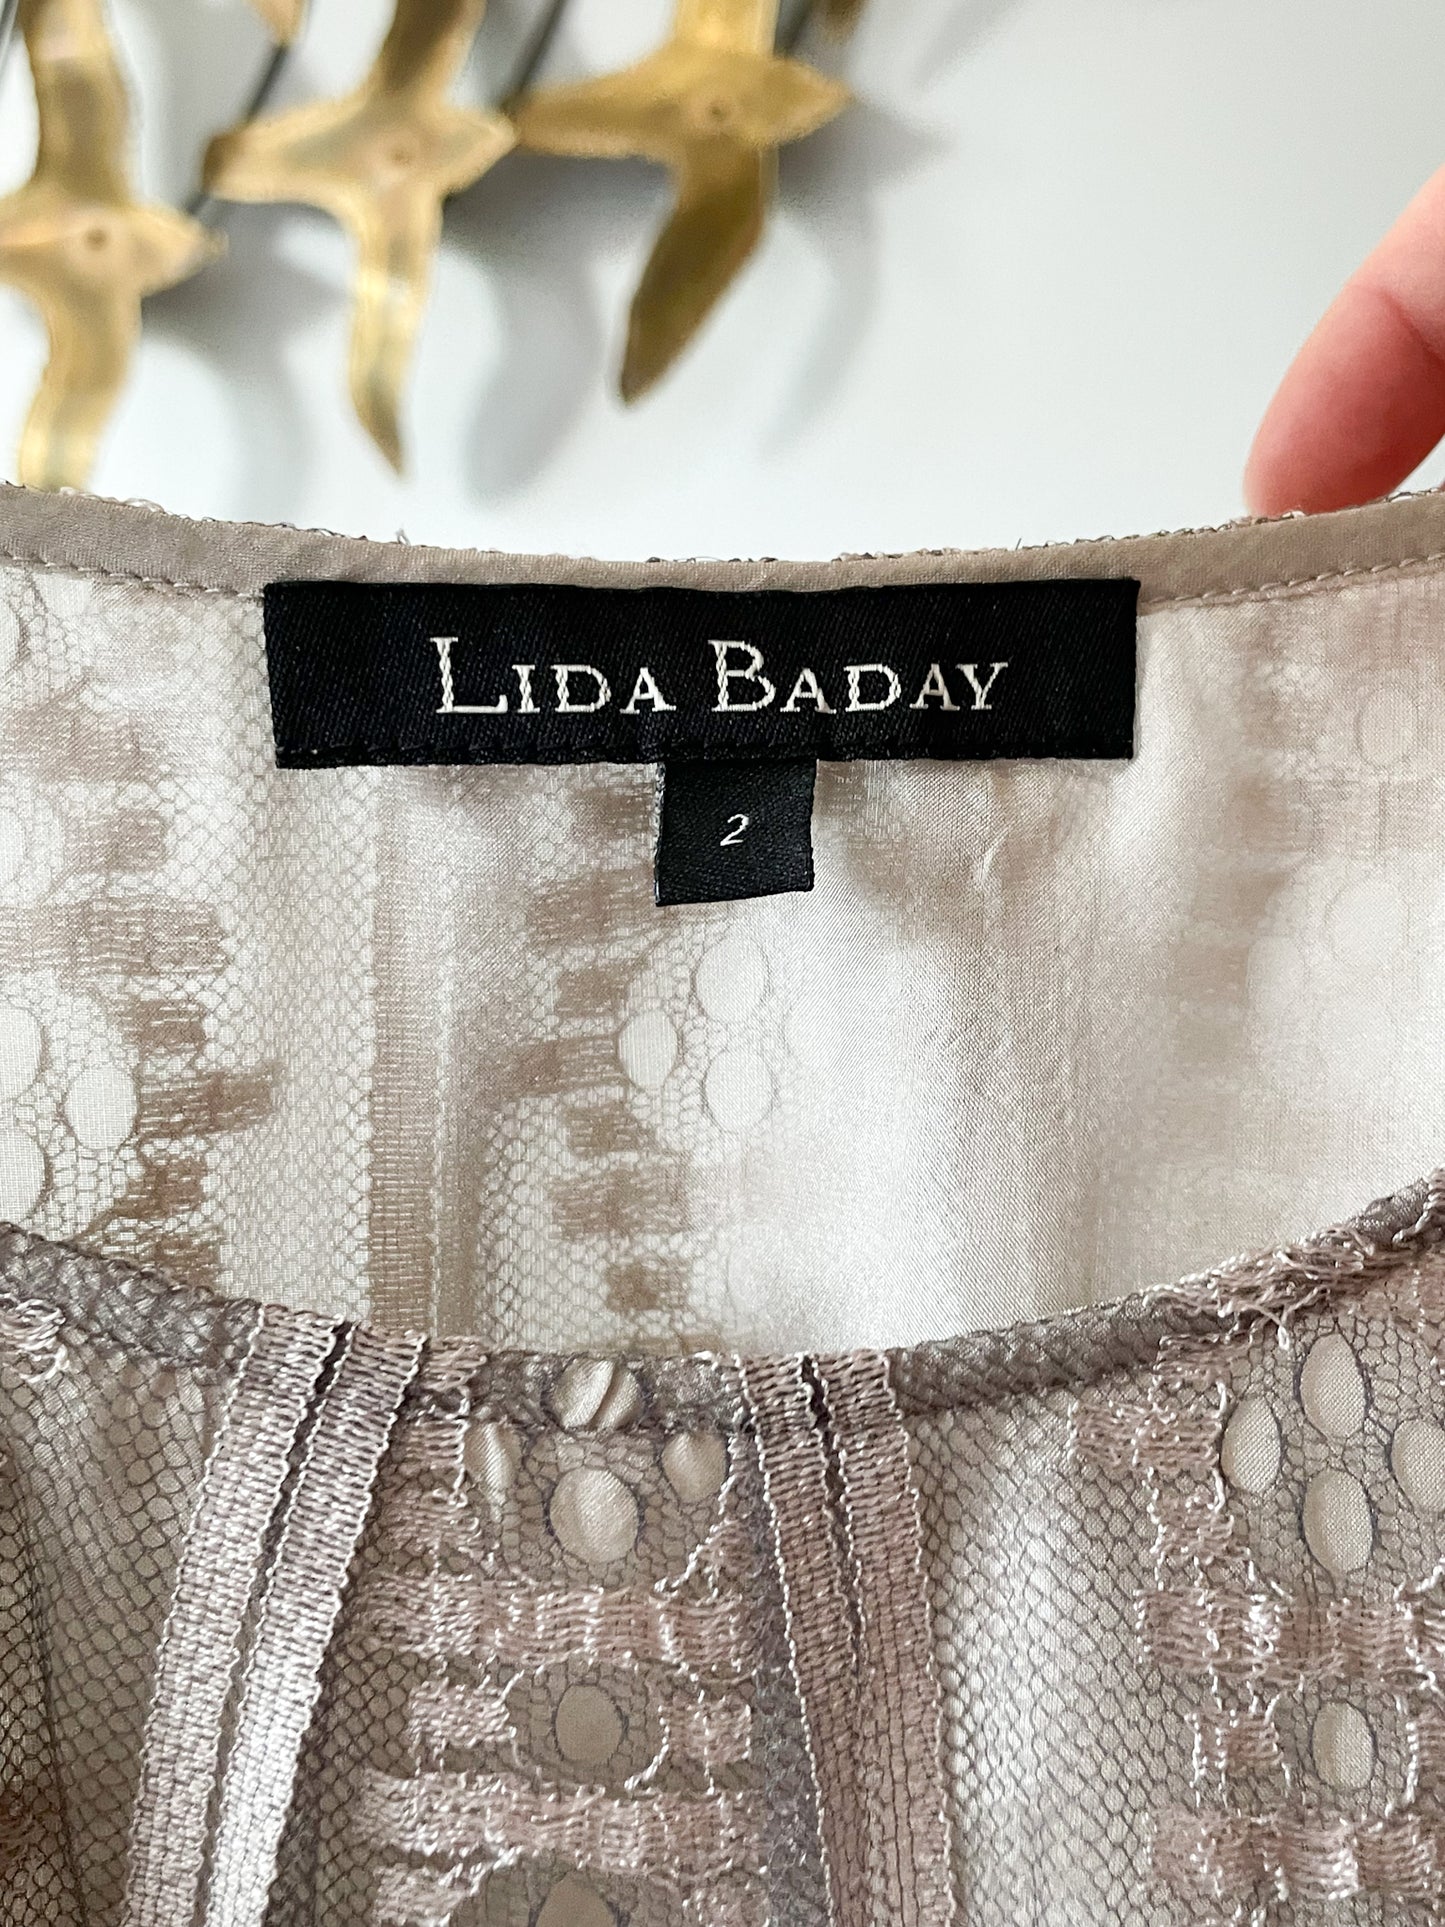 Lida Baday Rose Gold Embroidered Lace Silk Lined Top - Size 2